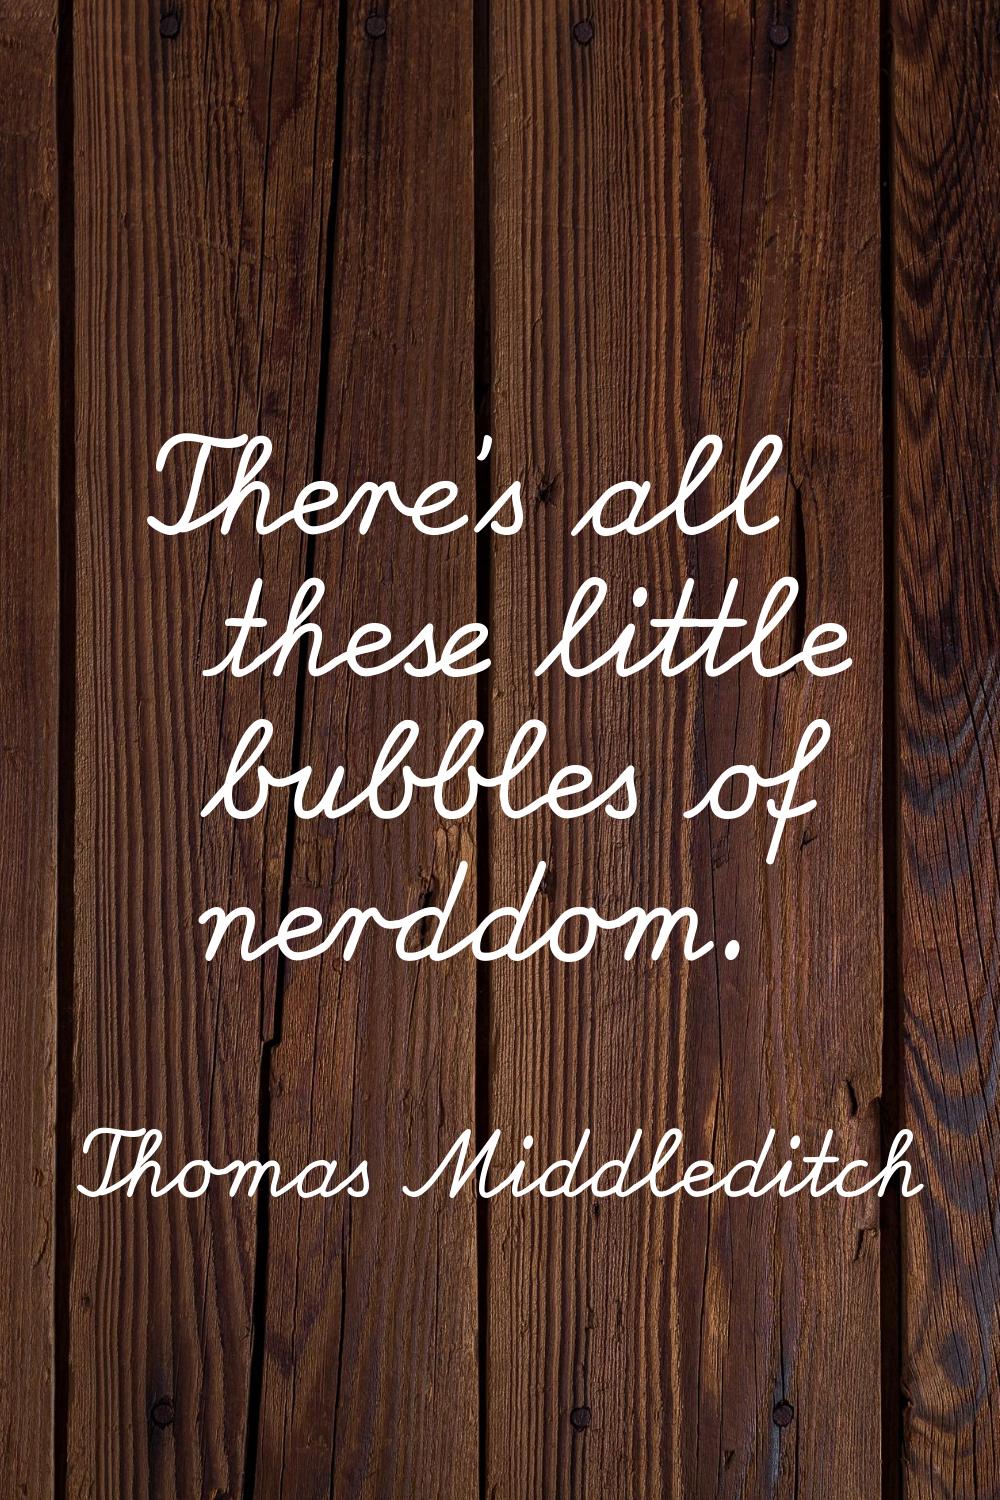 There's all these little bubbles of nerddom.